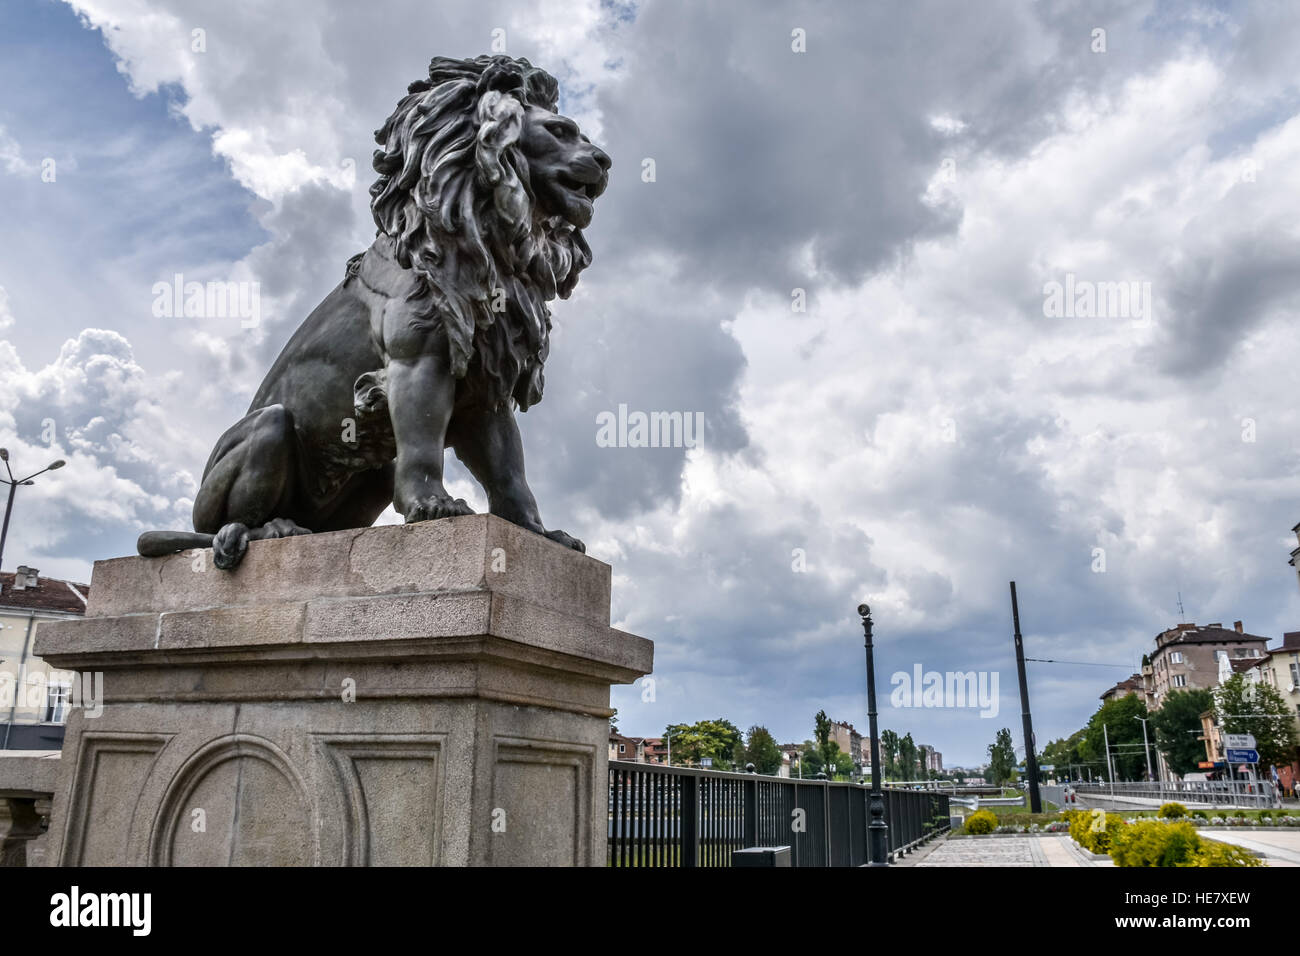 Lion statue on a cloudy day at Lion's Bridge in Sofia, Bulgaria Stock Photo